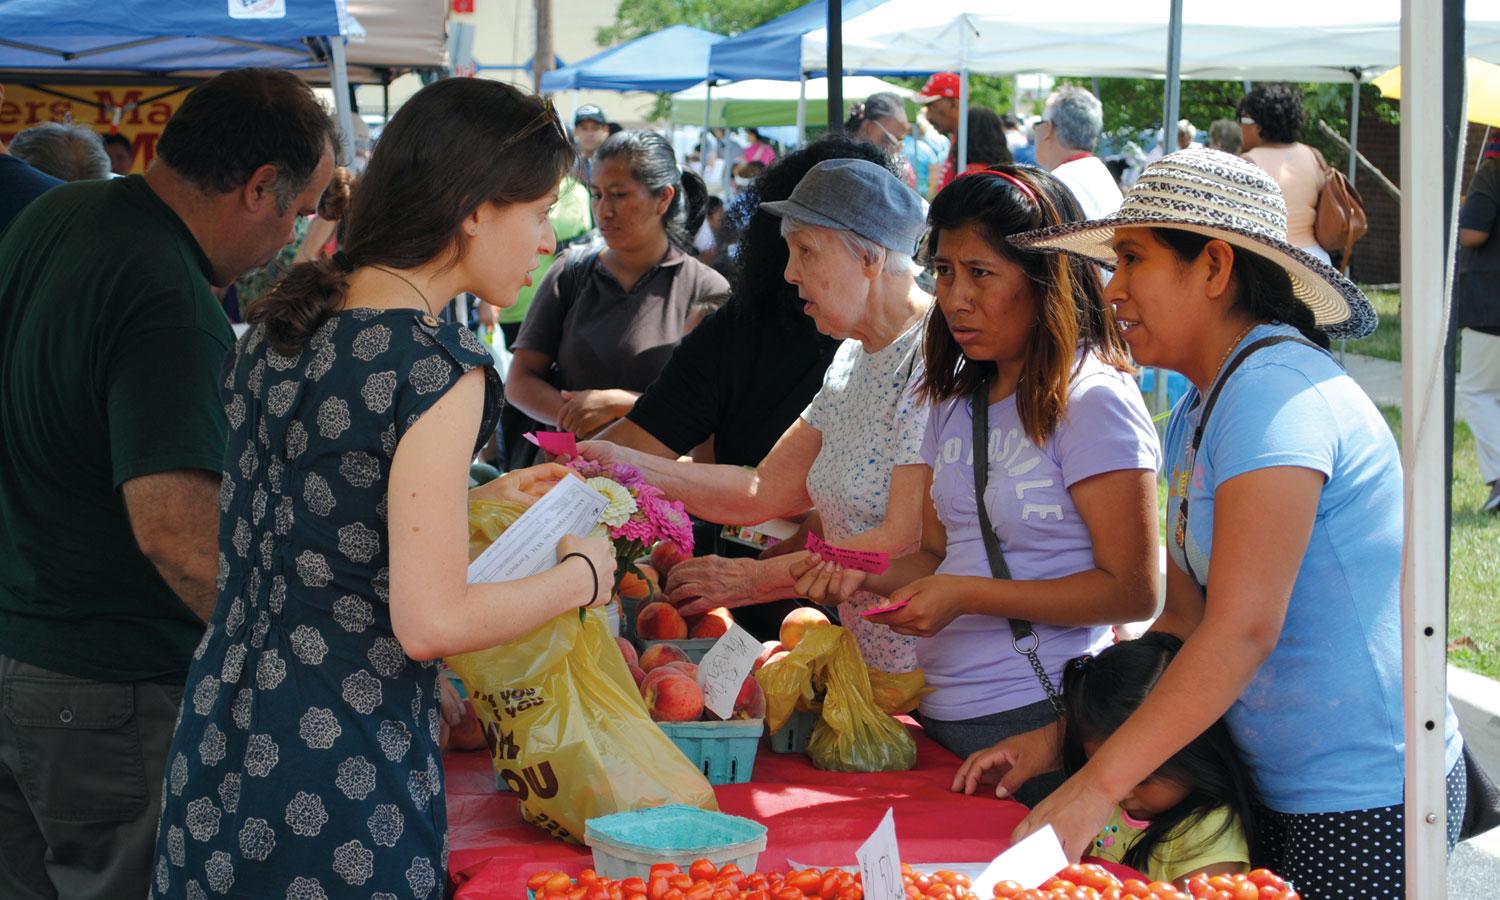 Women buying food at farmers market